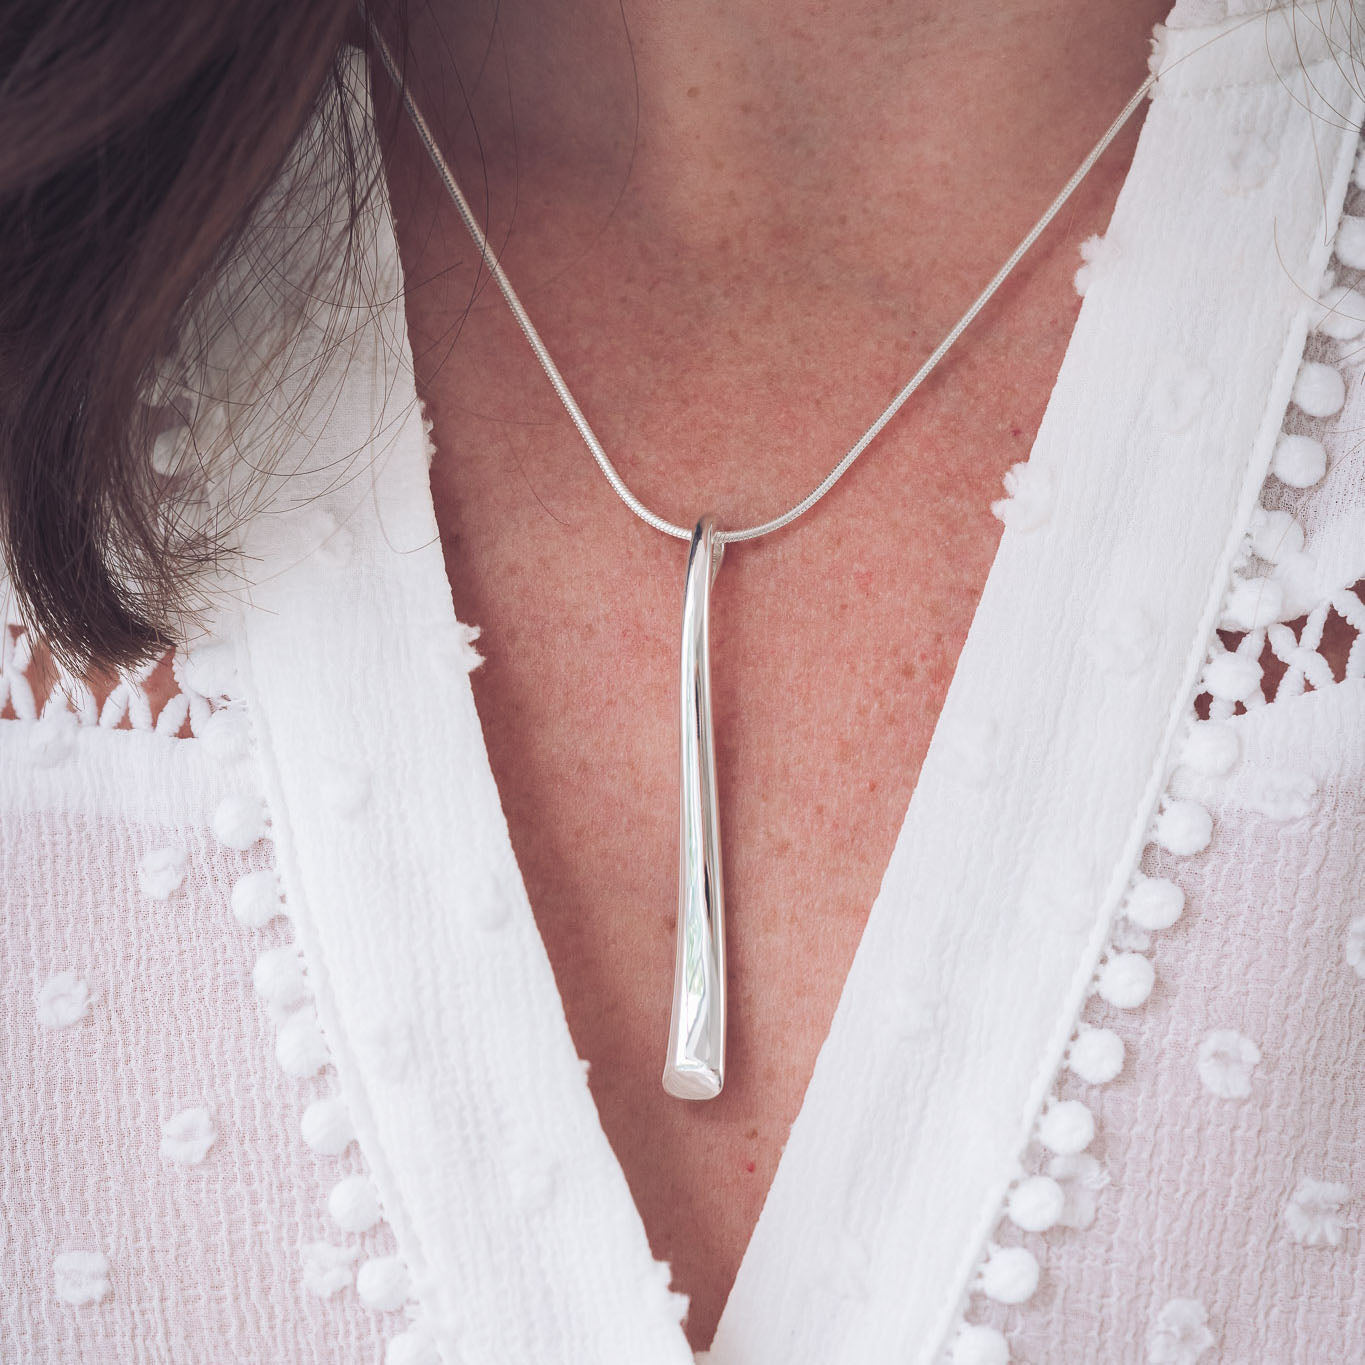 Handcrafted Long Silver Pendant